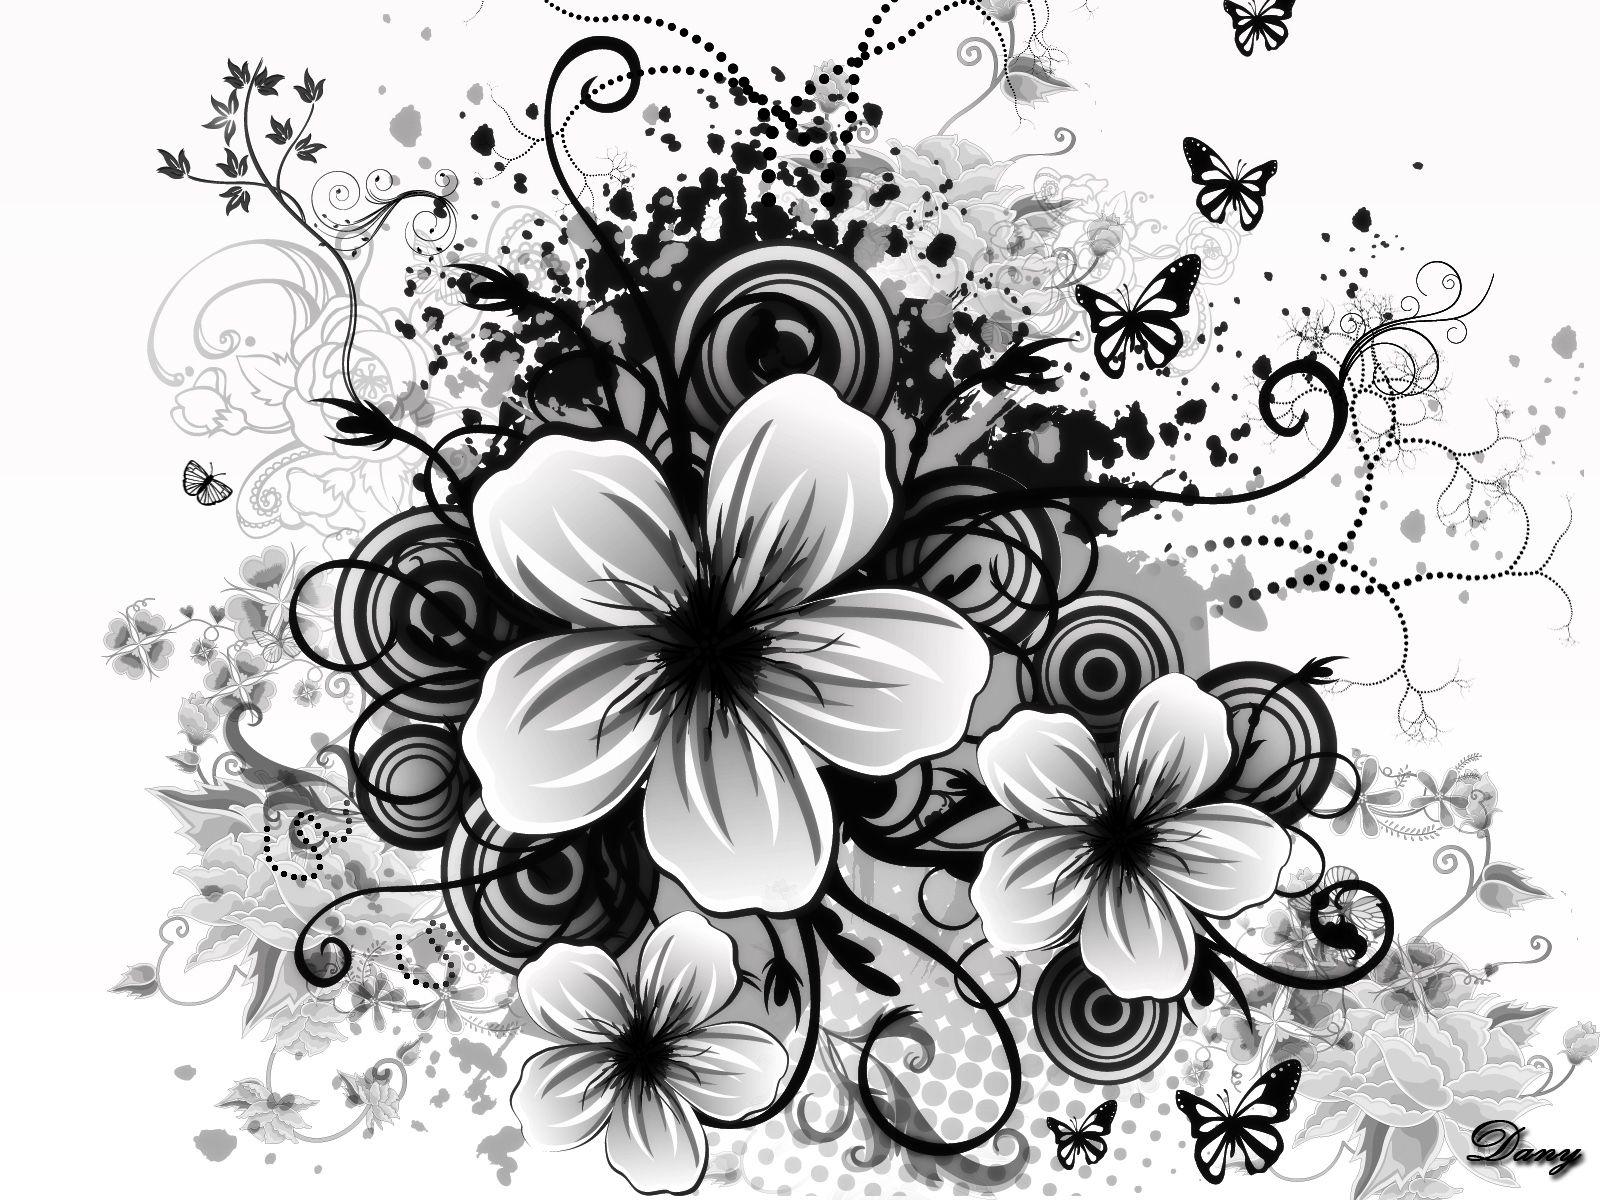 Black And White Image Of Flowers 7 Background